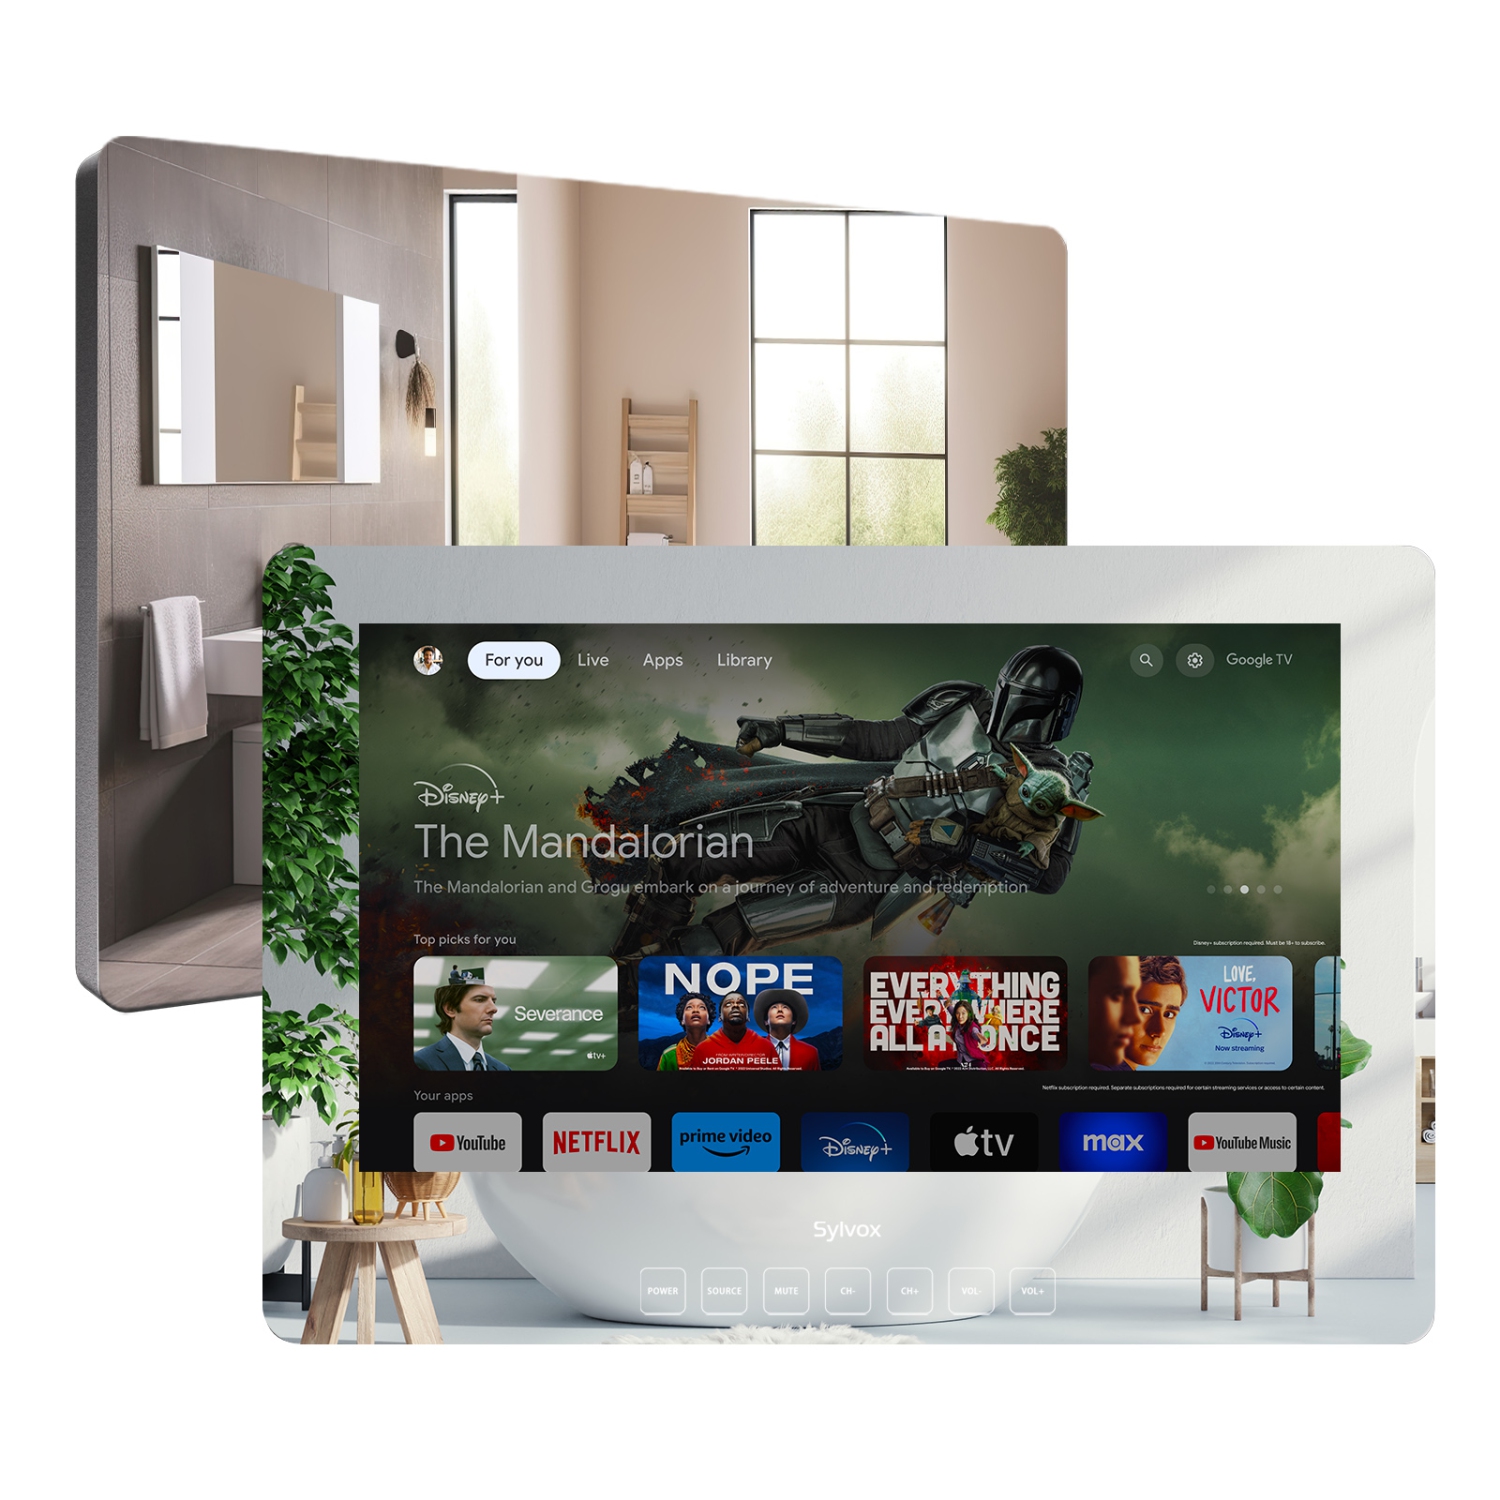 SYLVOX 32" Smart Mirror TV, Wall Mount Bathroom TV with Android 11.0 System, Google Play, Google Assistant, IP66 Waterproof TV Integrated NTSC & ATSC Tuner Support WiFi Bluetooth